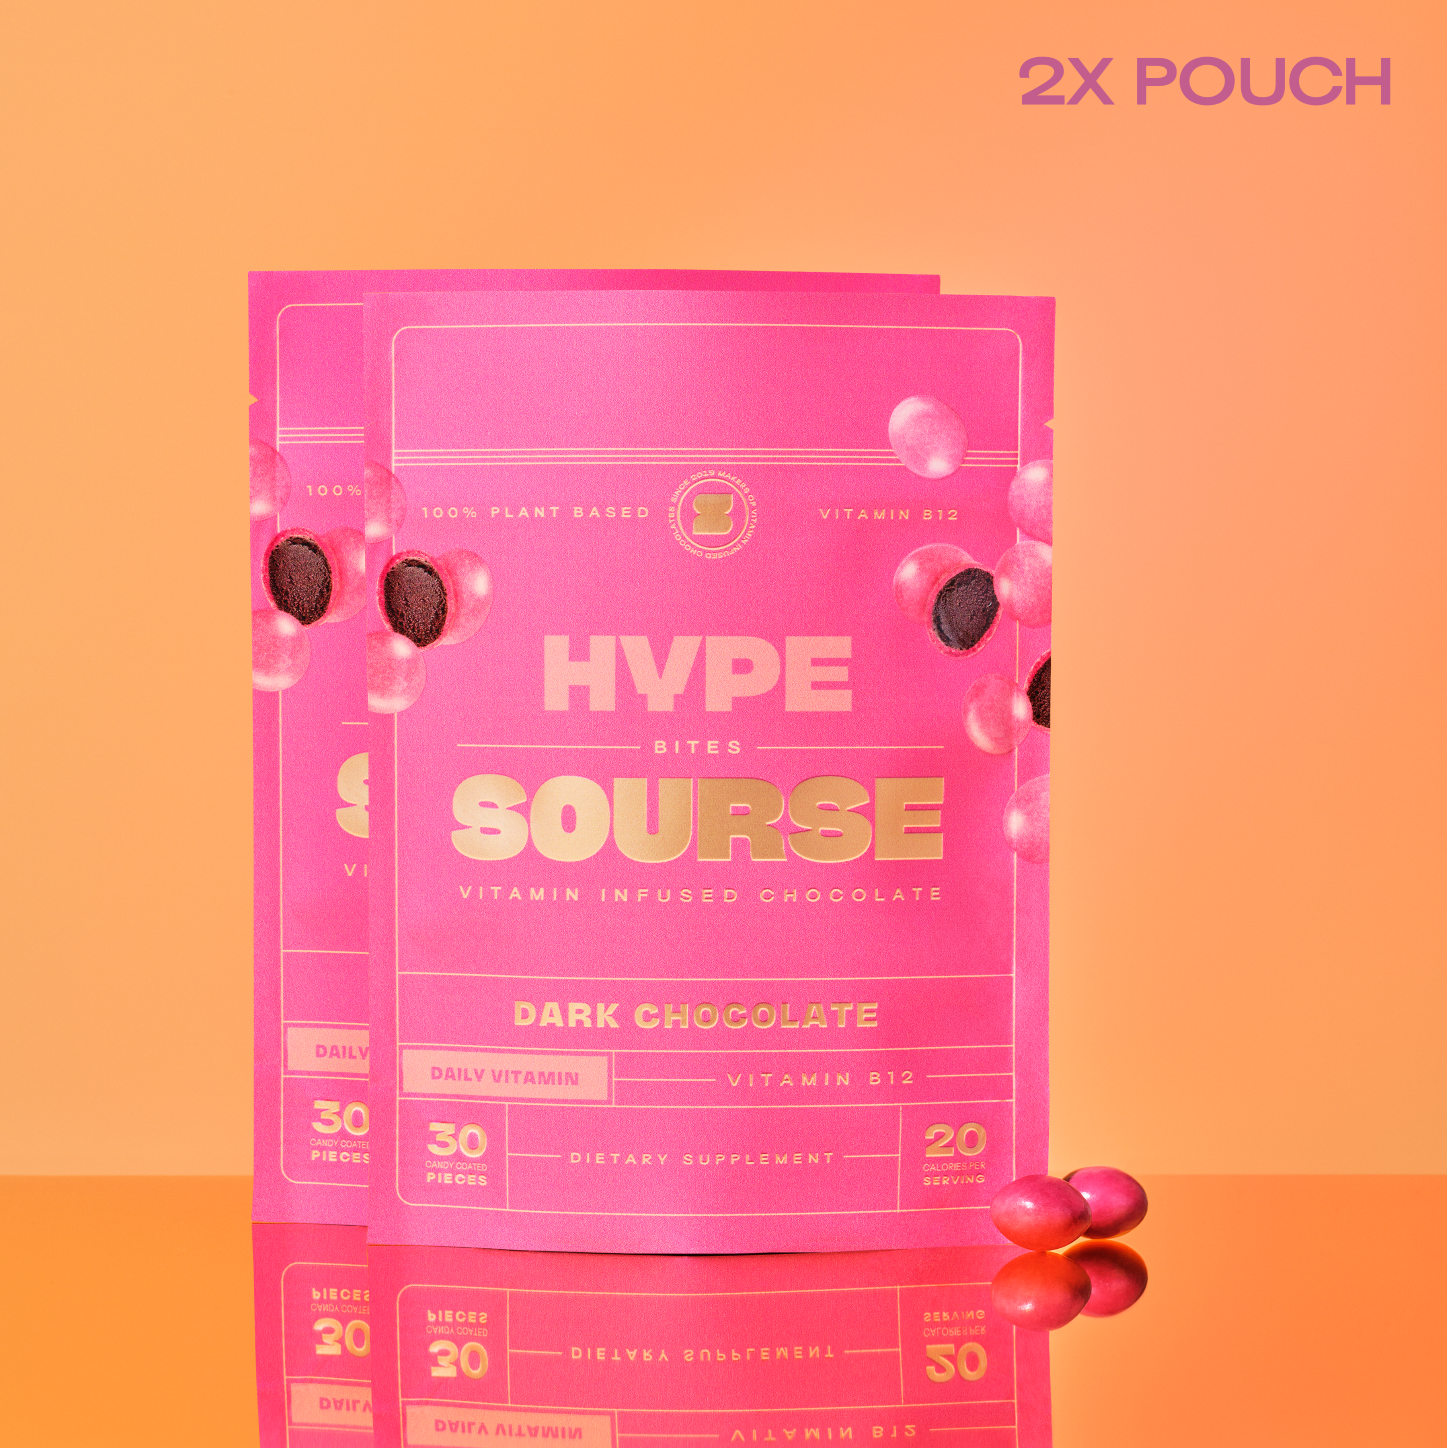 Sourse Hype Bites two bags